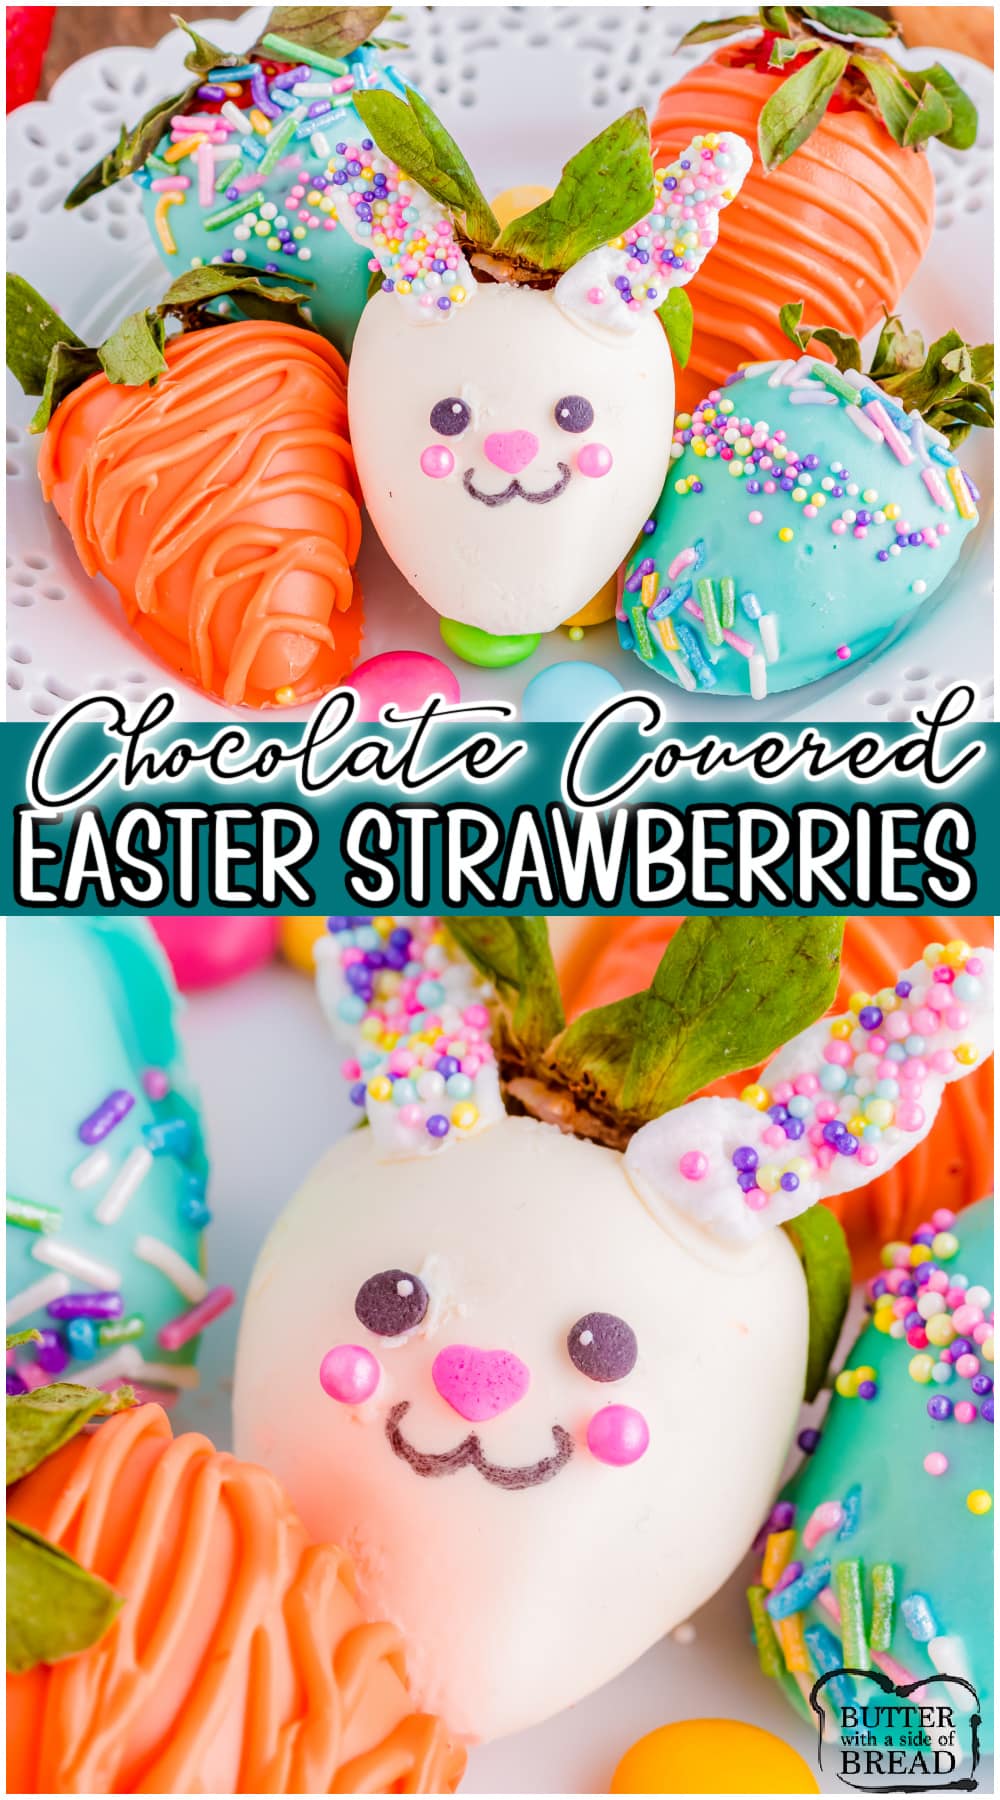 Easter Chocolate Covered Strawberries are fun, festive & perfect for your Easter dessert table! Strawberries dipped in chocolate & decorated like an Easter bunny, a carrot & an Easter egg! 